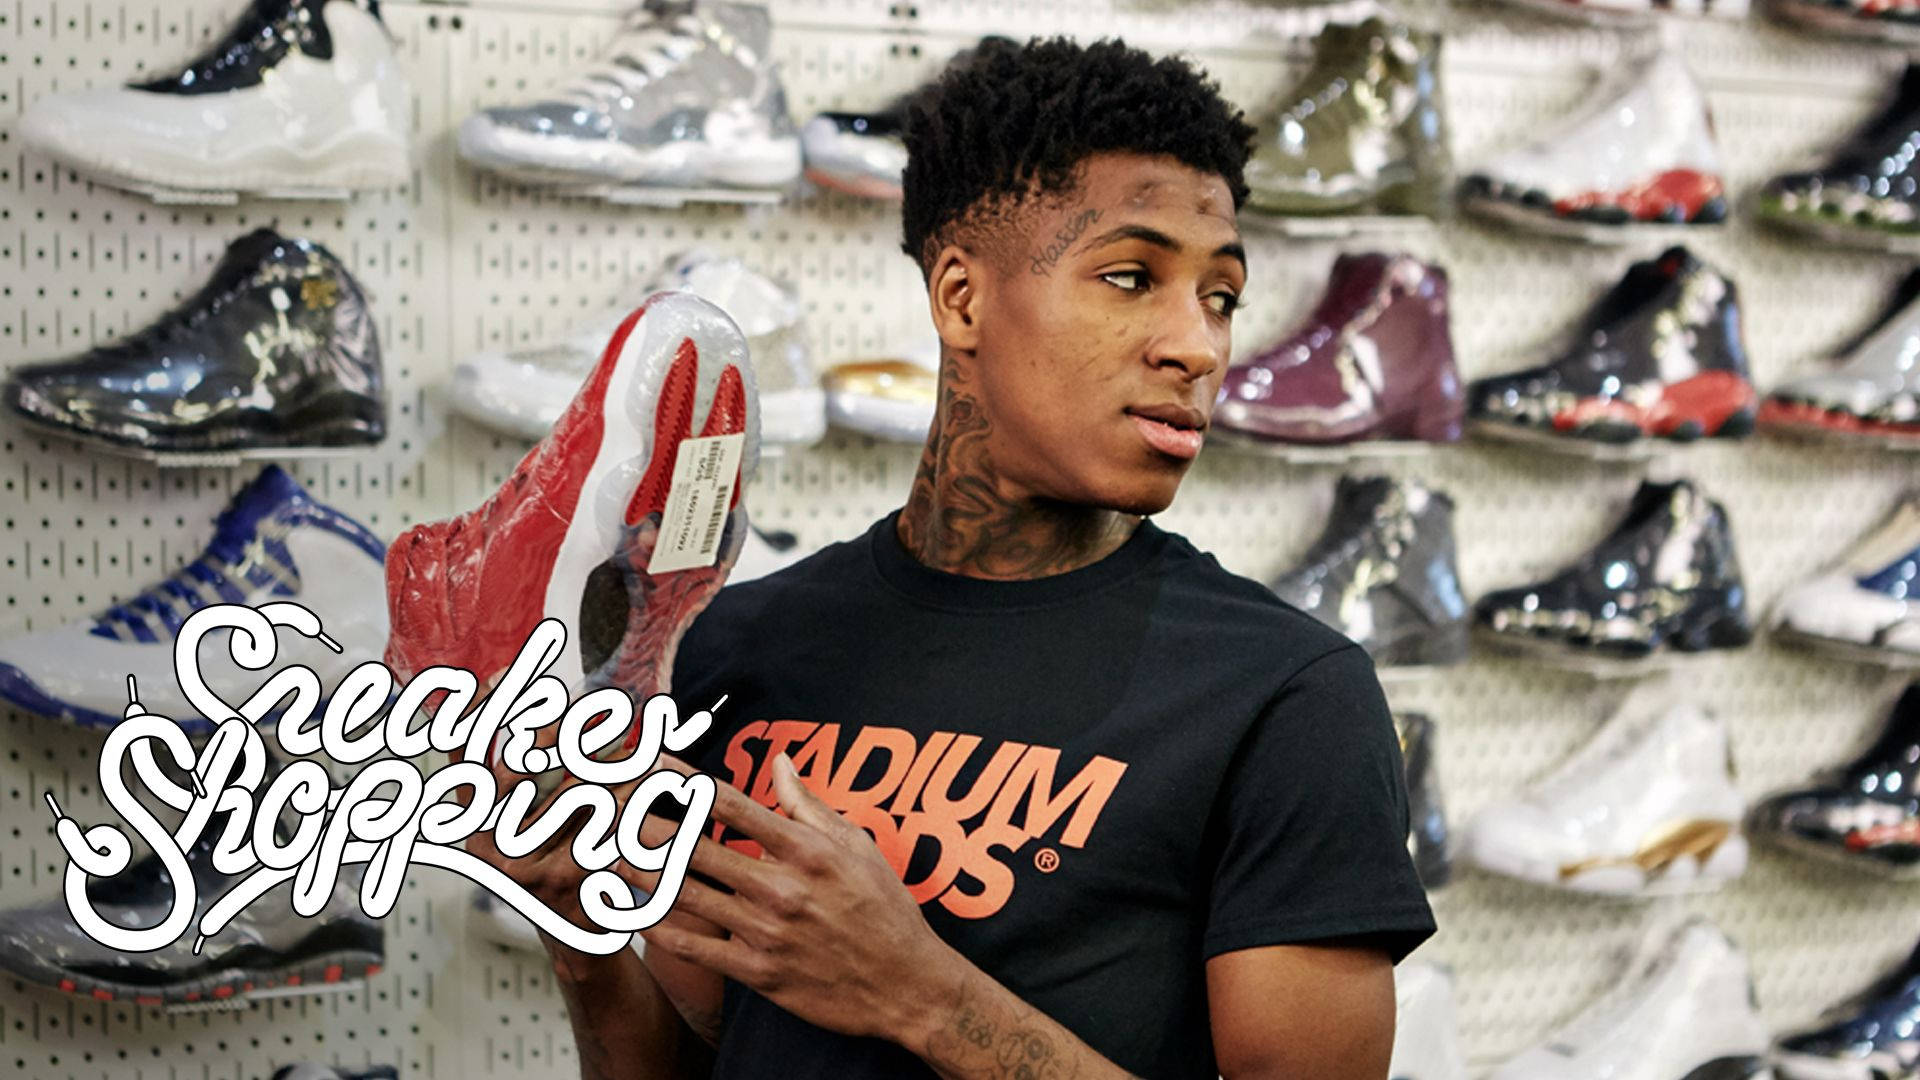 NBA Youngboy on a Sneaker Shopping spree Wallpaper